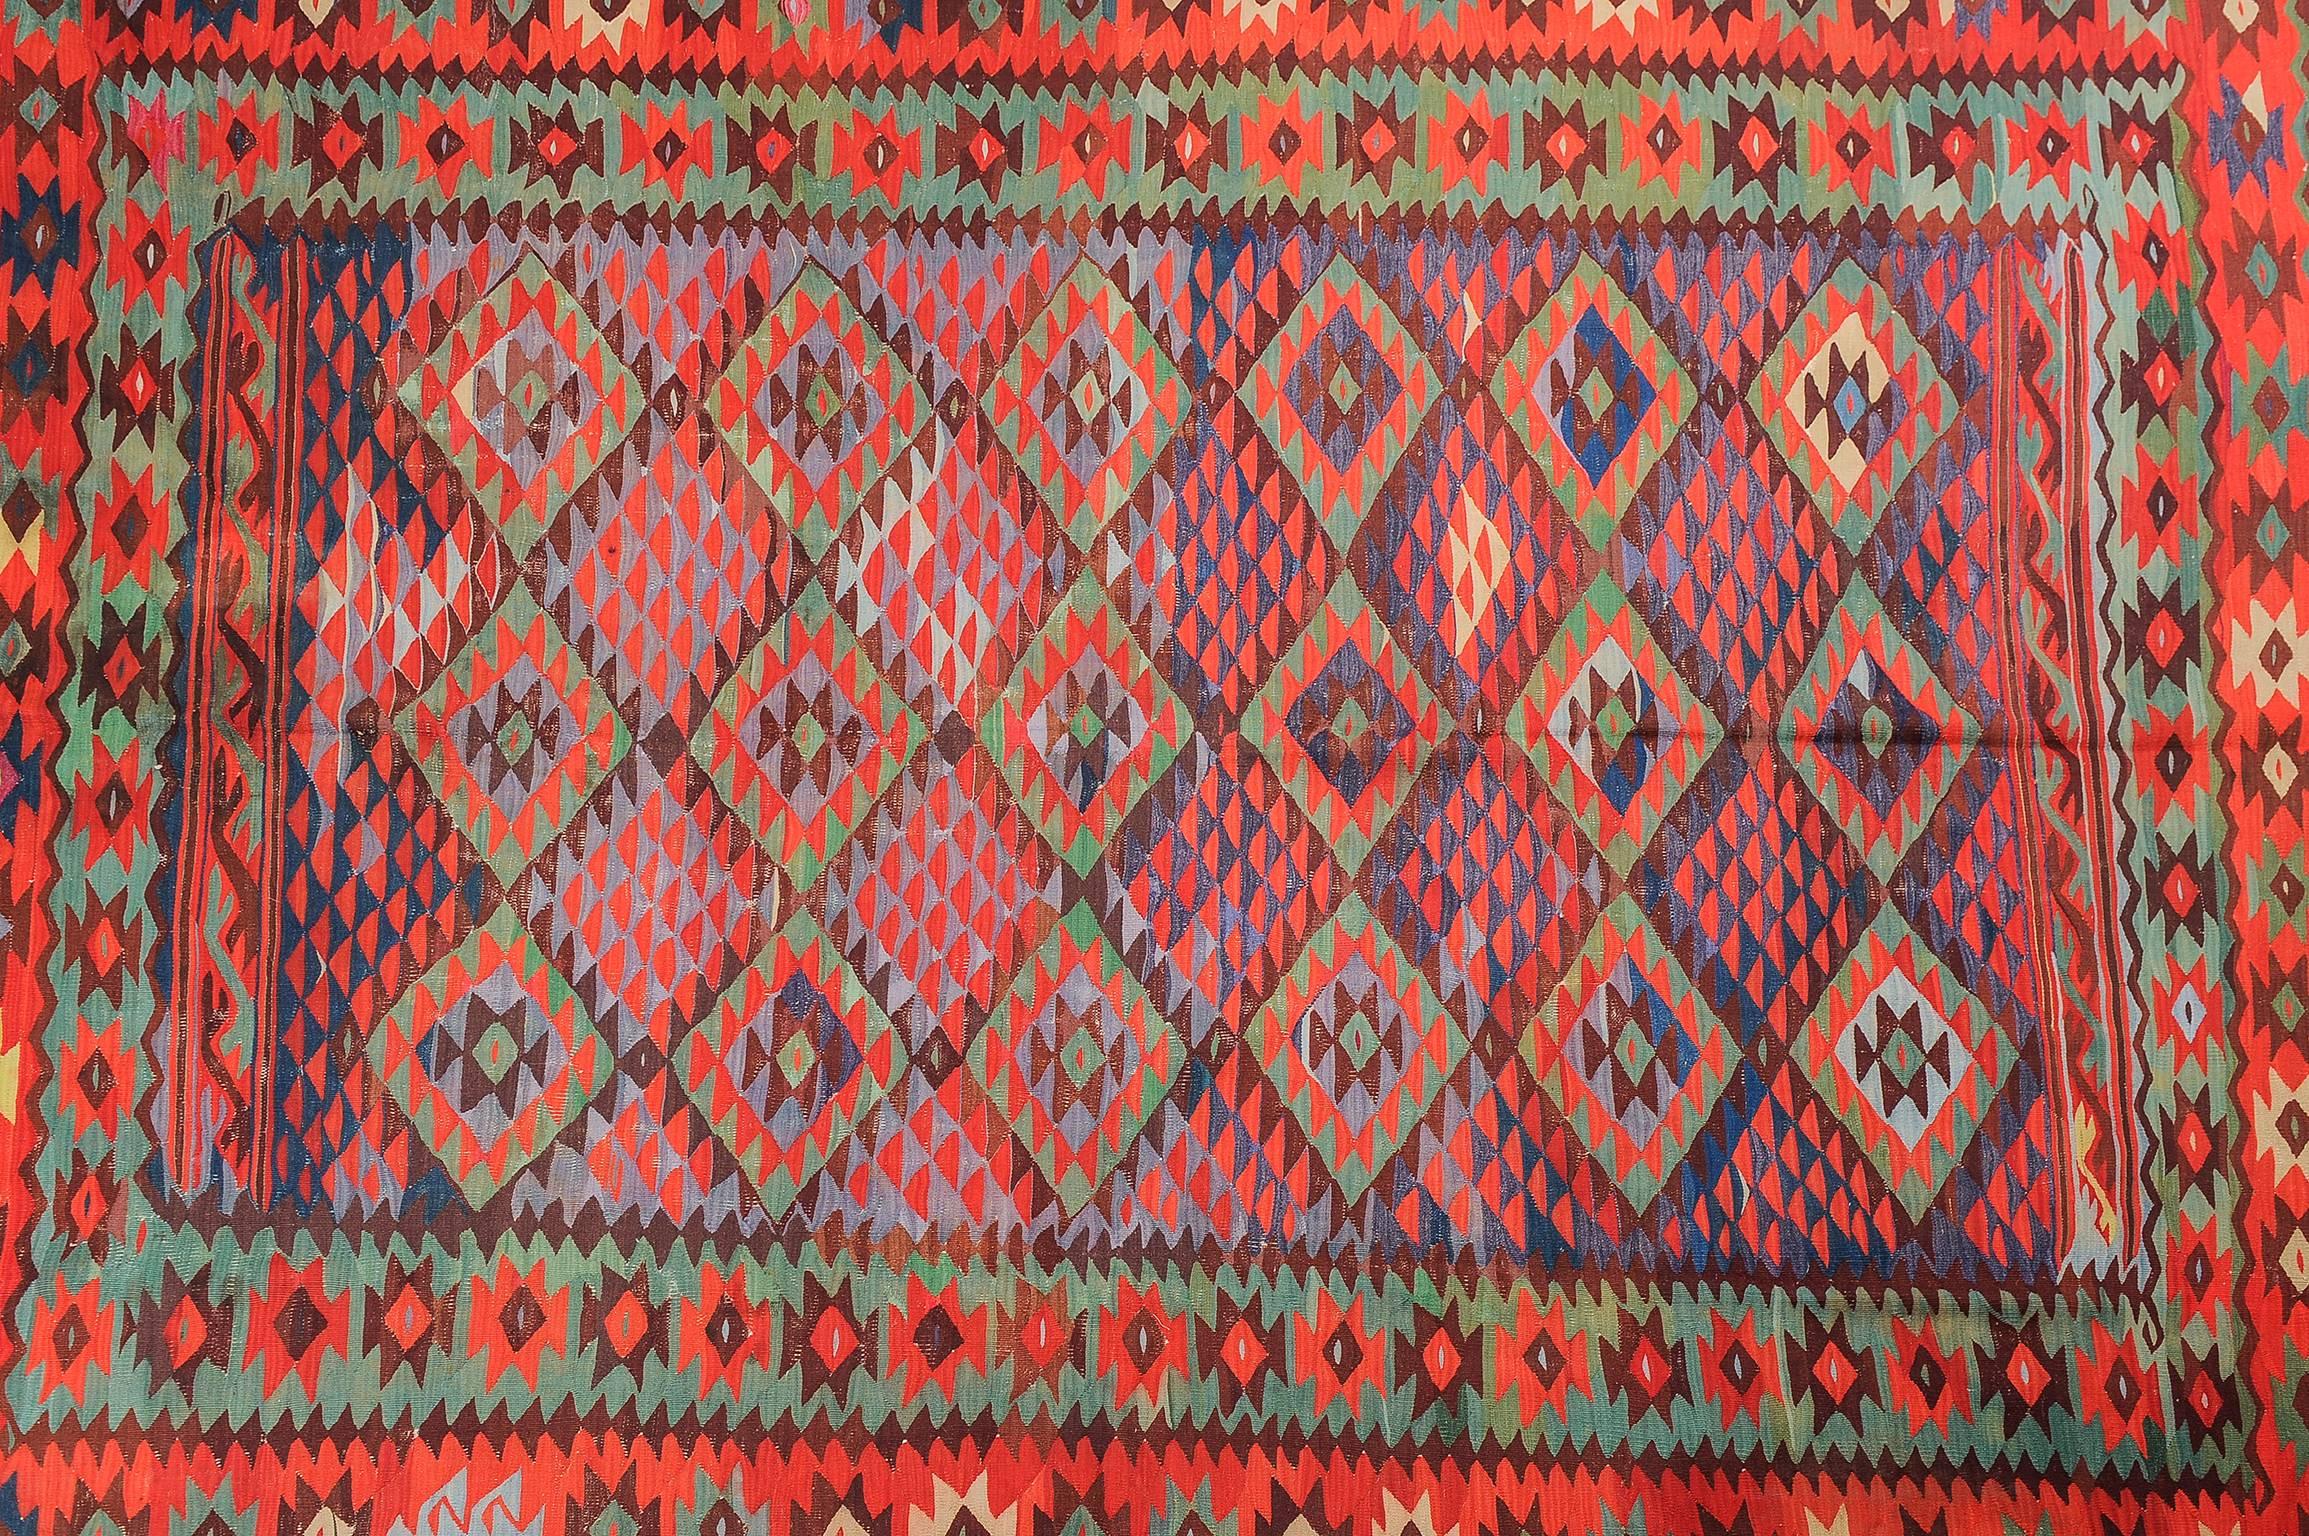 Hand-Woven Specially Large Rare Old Fine Turkish Kilim Sharkoy